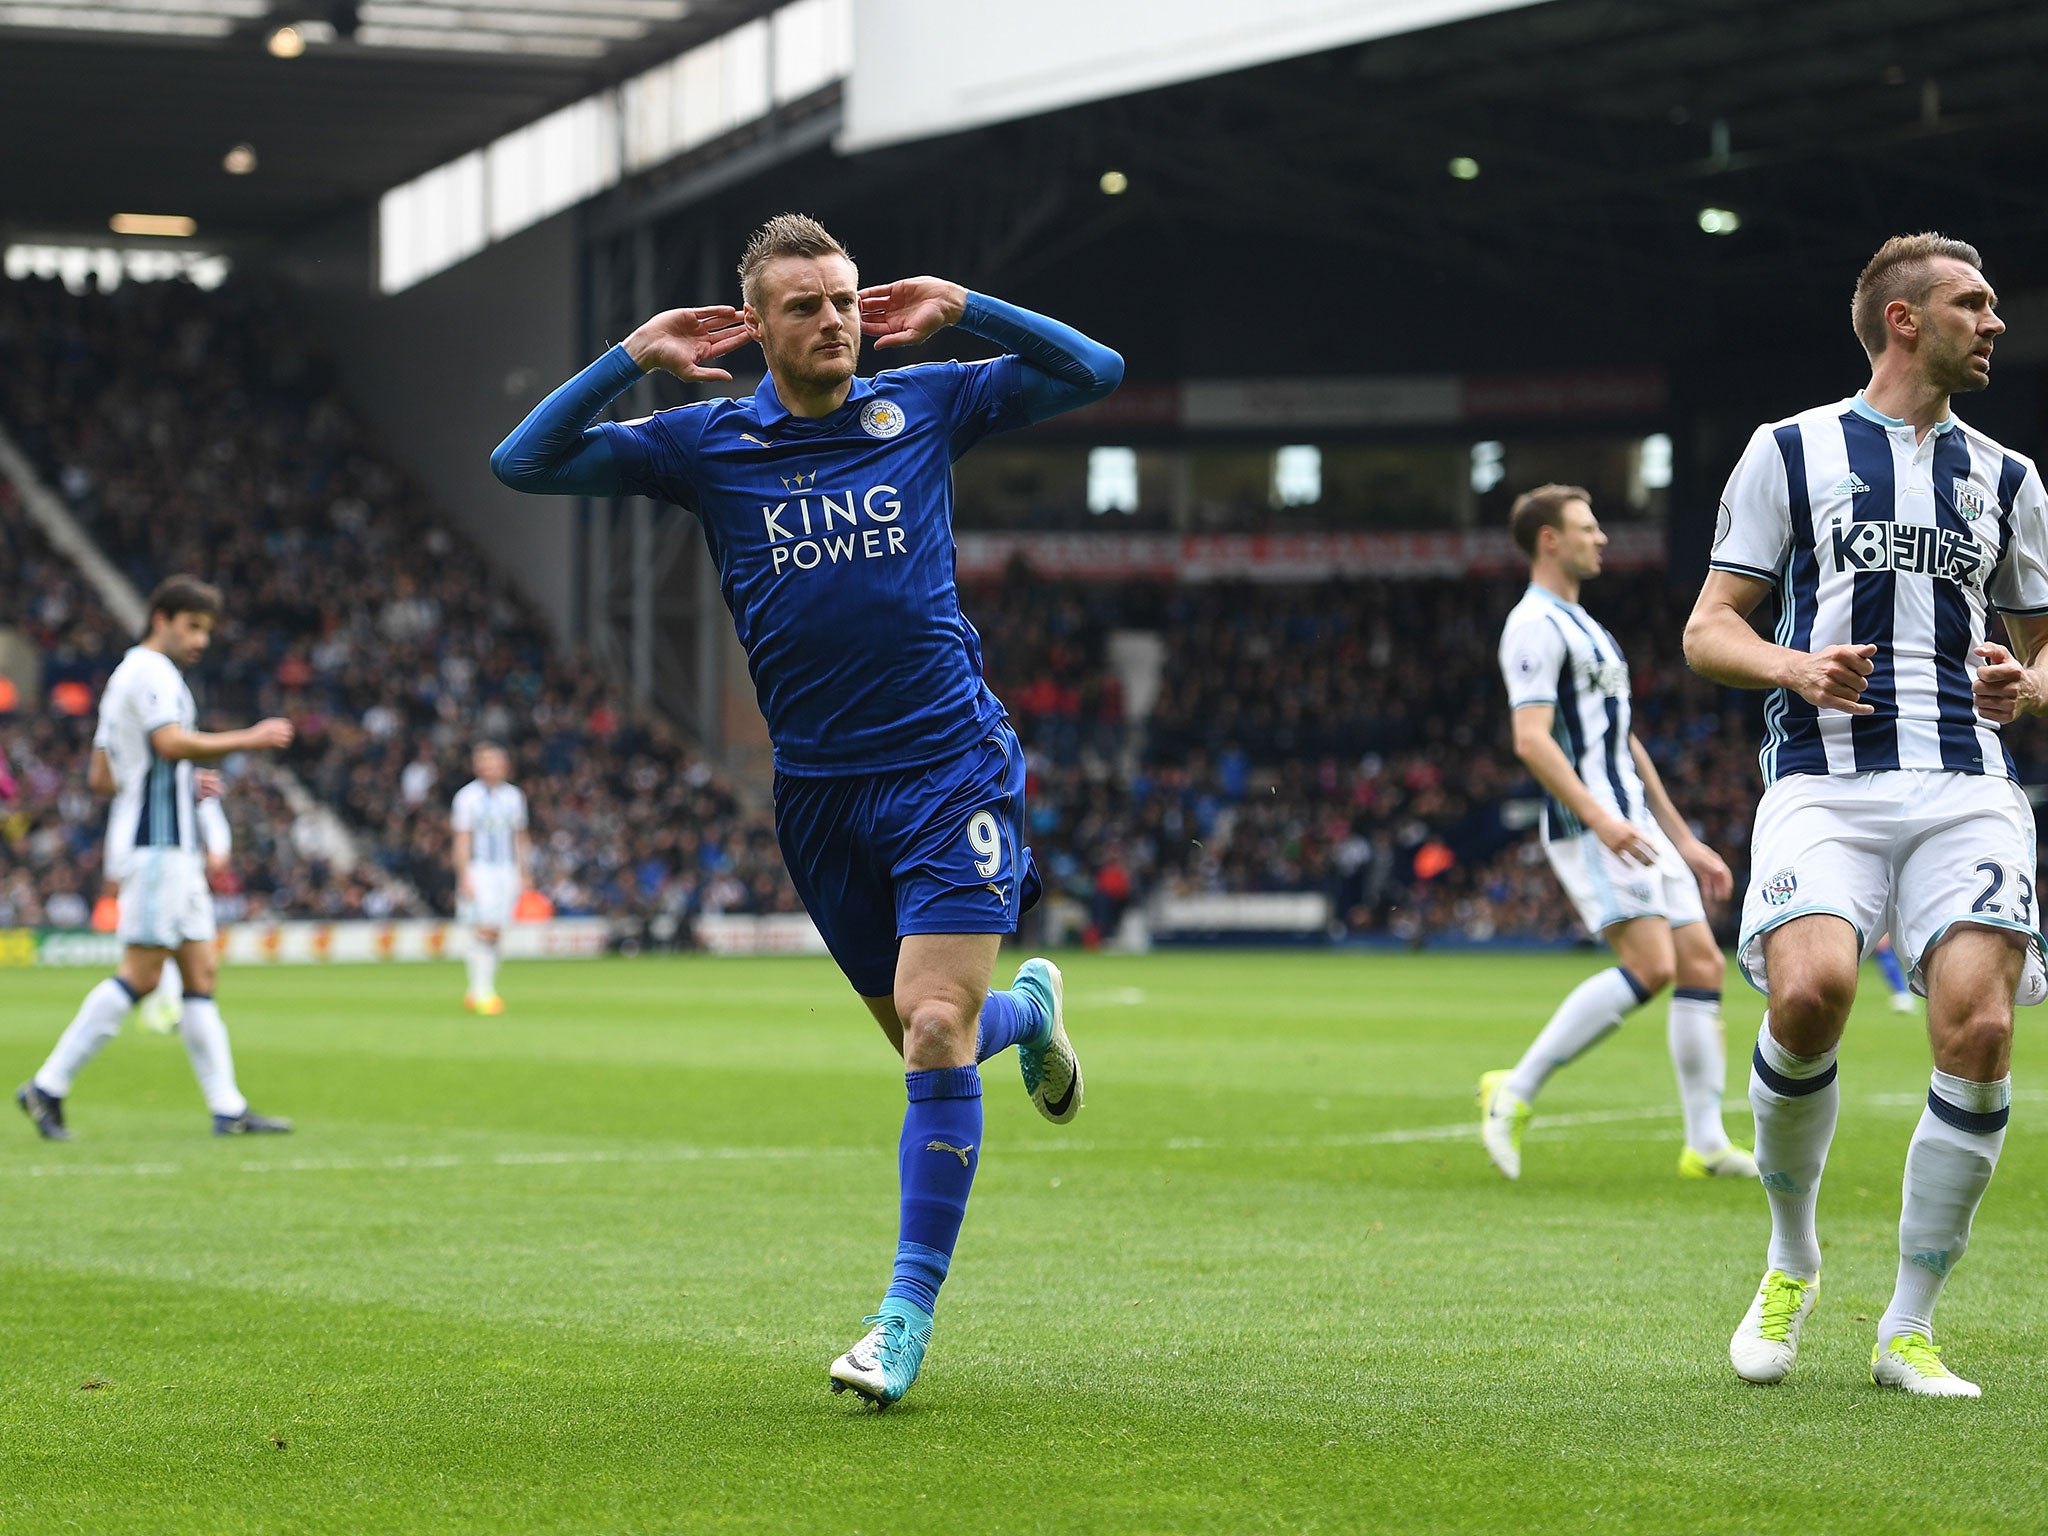 Jamie Vardy scored the only goal in Leicester last's Premier League meeting with the Baggies